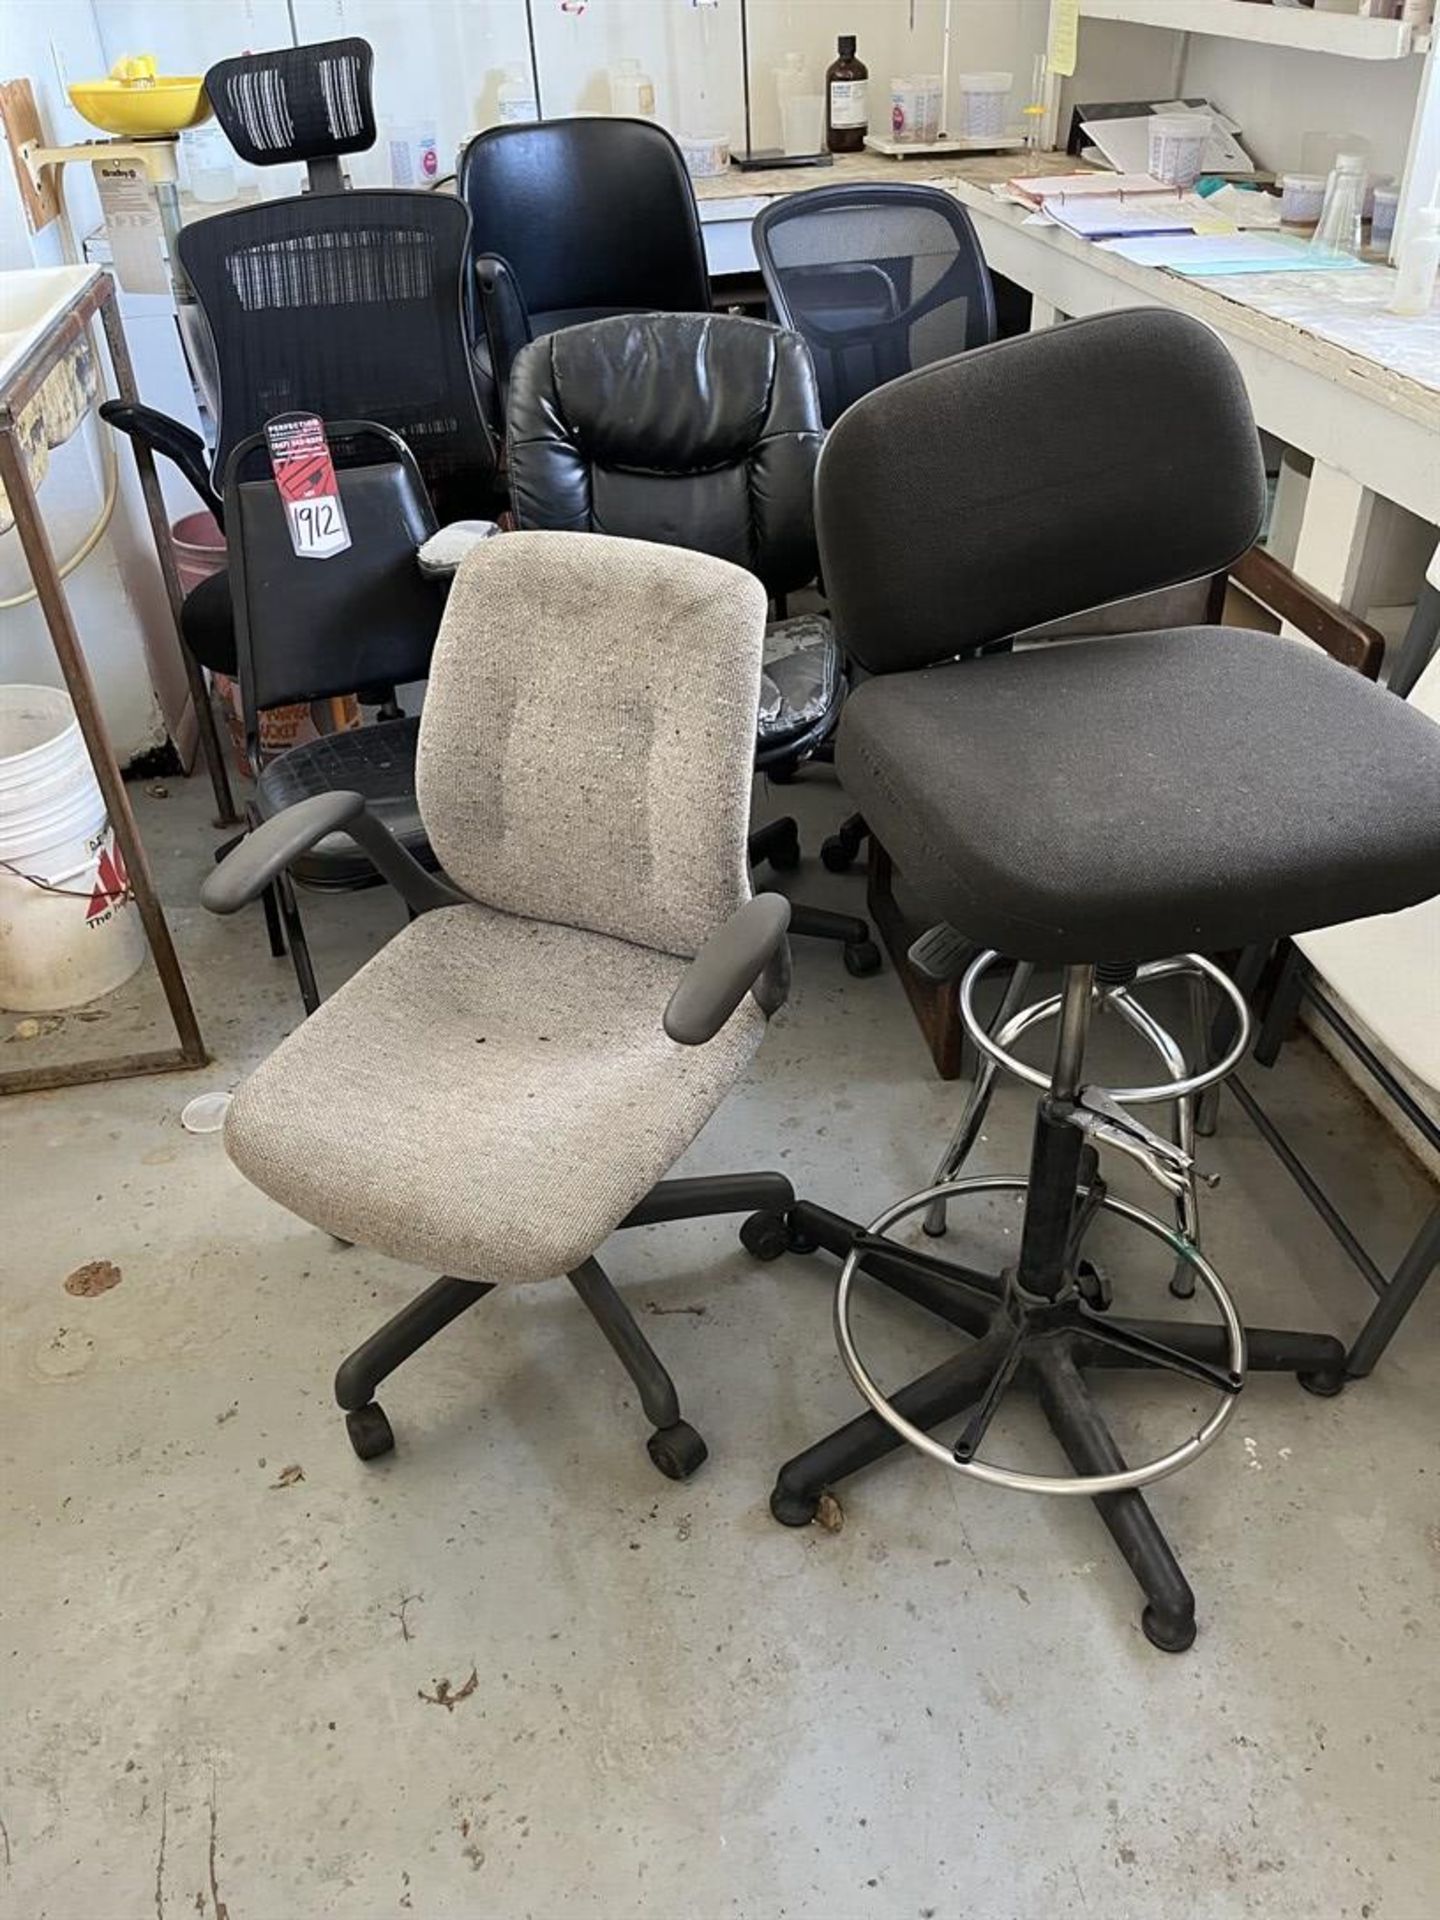 Lot of Assorted Chairs